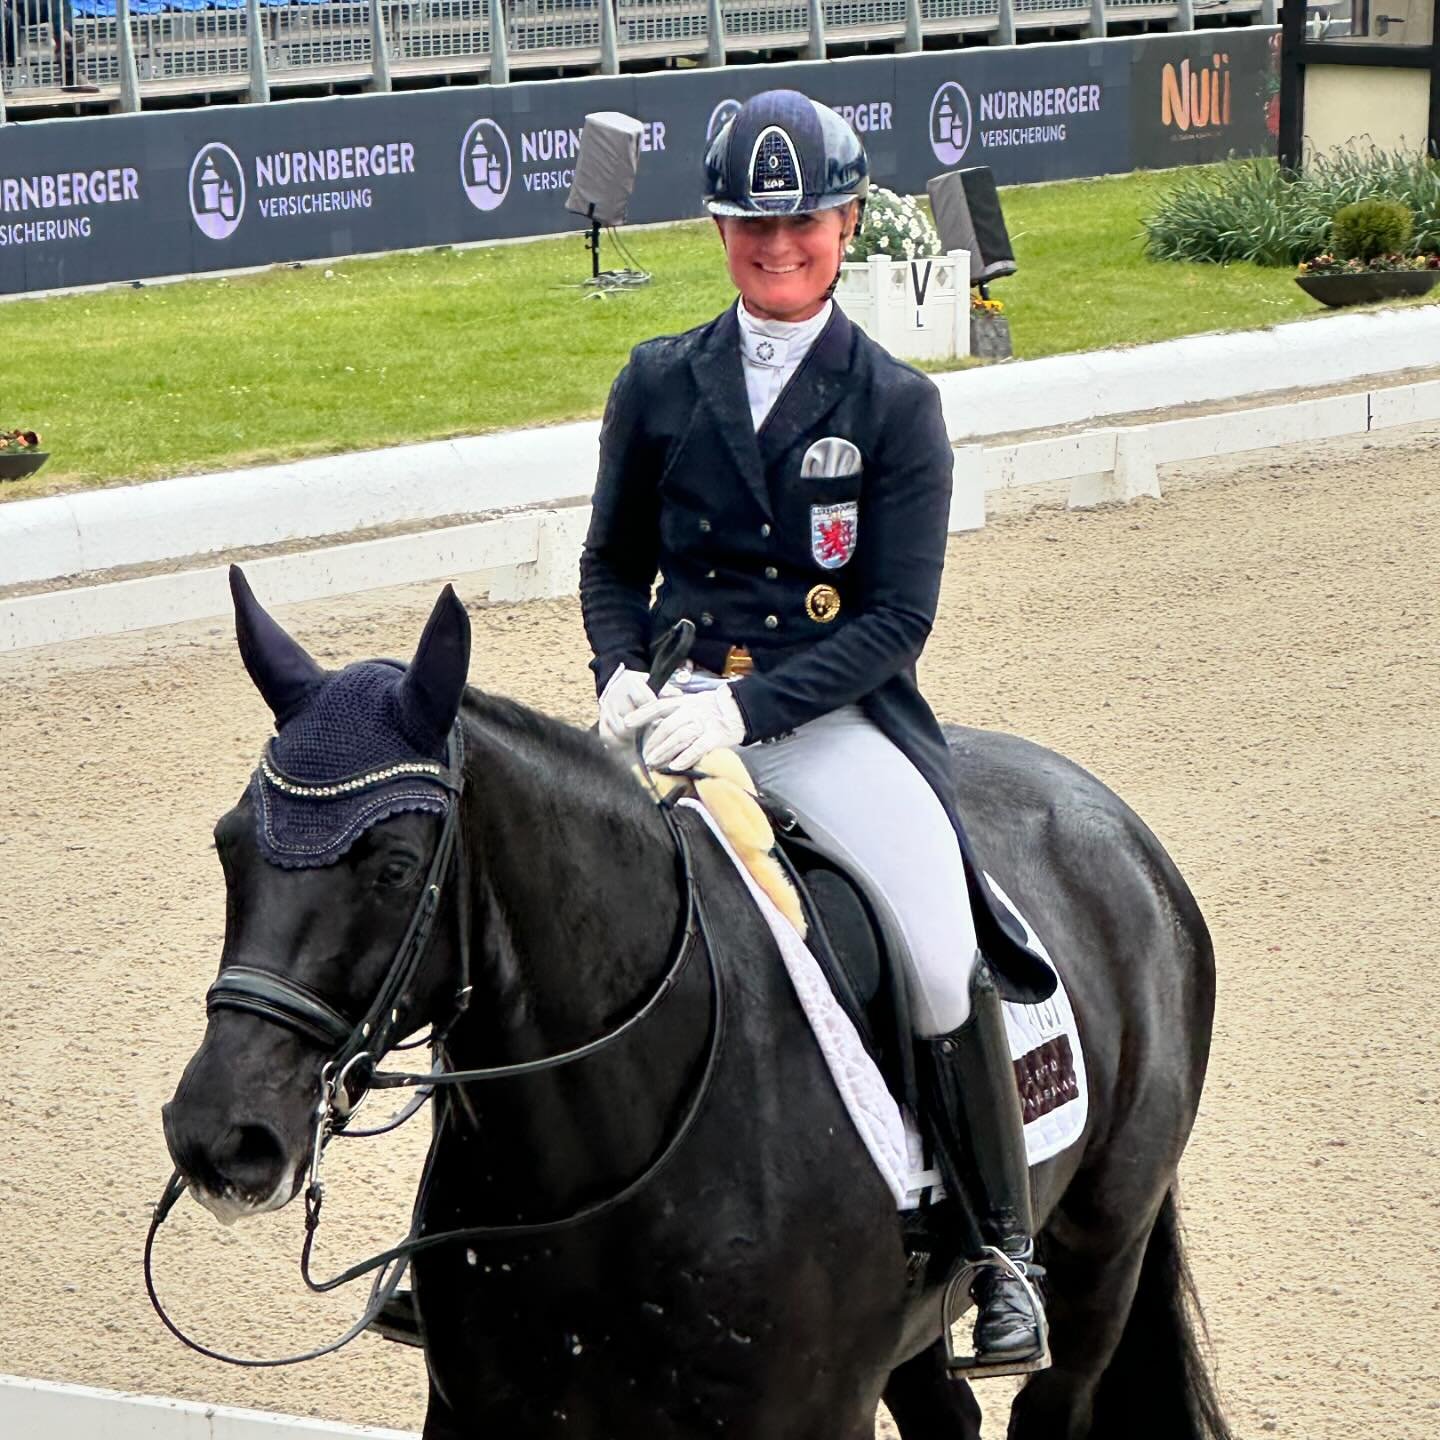 DSP Big Bang &amp; Kristine M&ouml;ller-Engel with a very strong performance just starting their test in pouring rain. Super power and balance  for the trot tour, lovely extensions, supple half passes, good extended walk, bit one the toes for collect